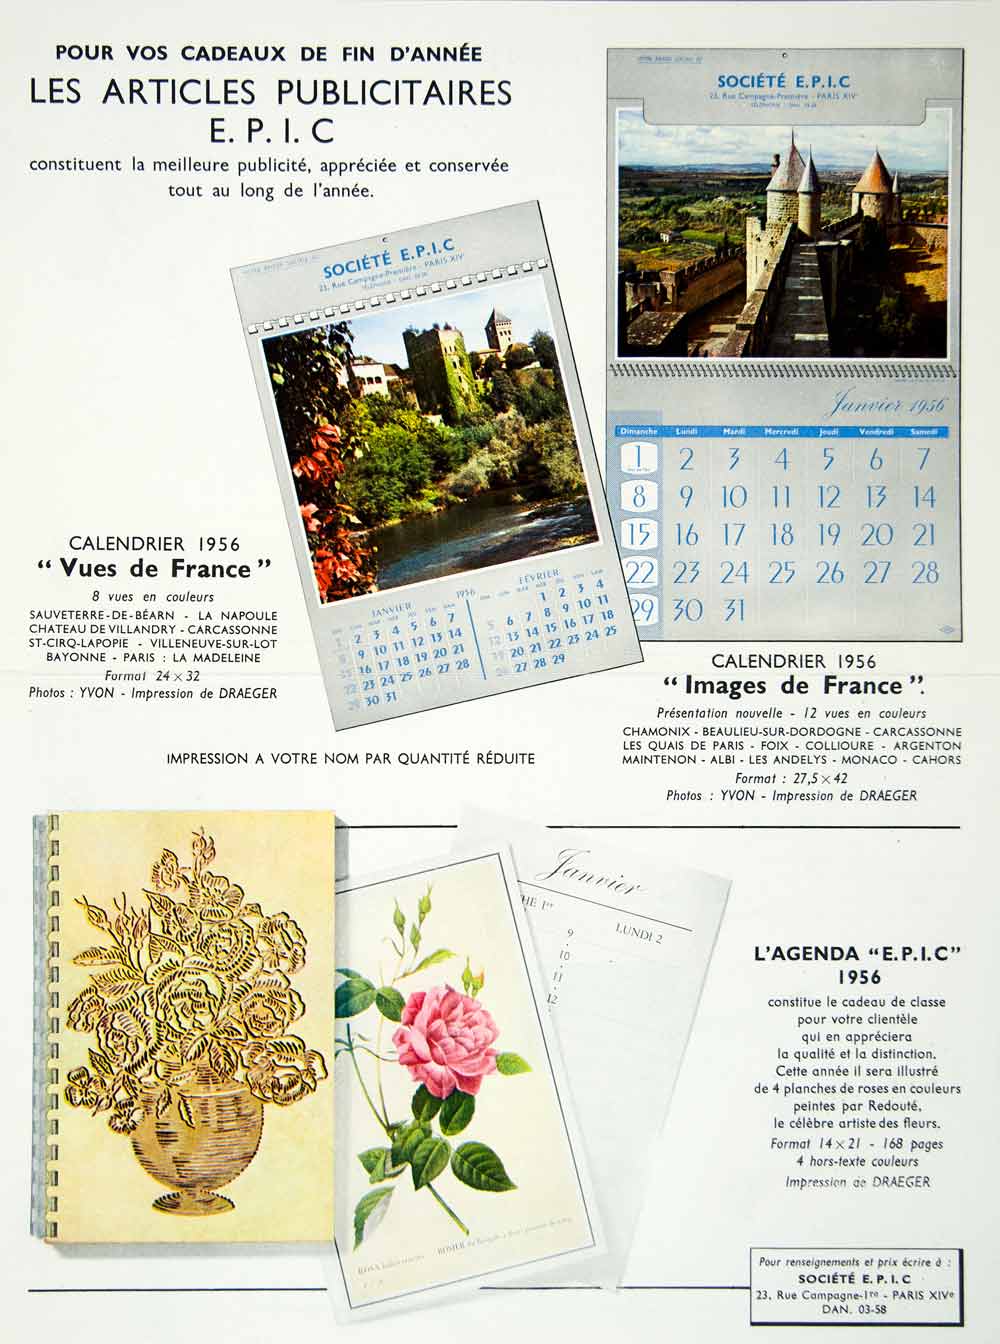 1957 Ad EPIC Calendar French Agenda Street Map Gift Card Stationary VEN1